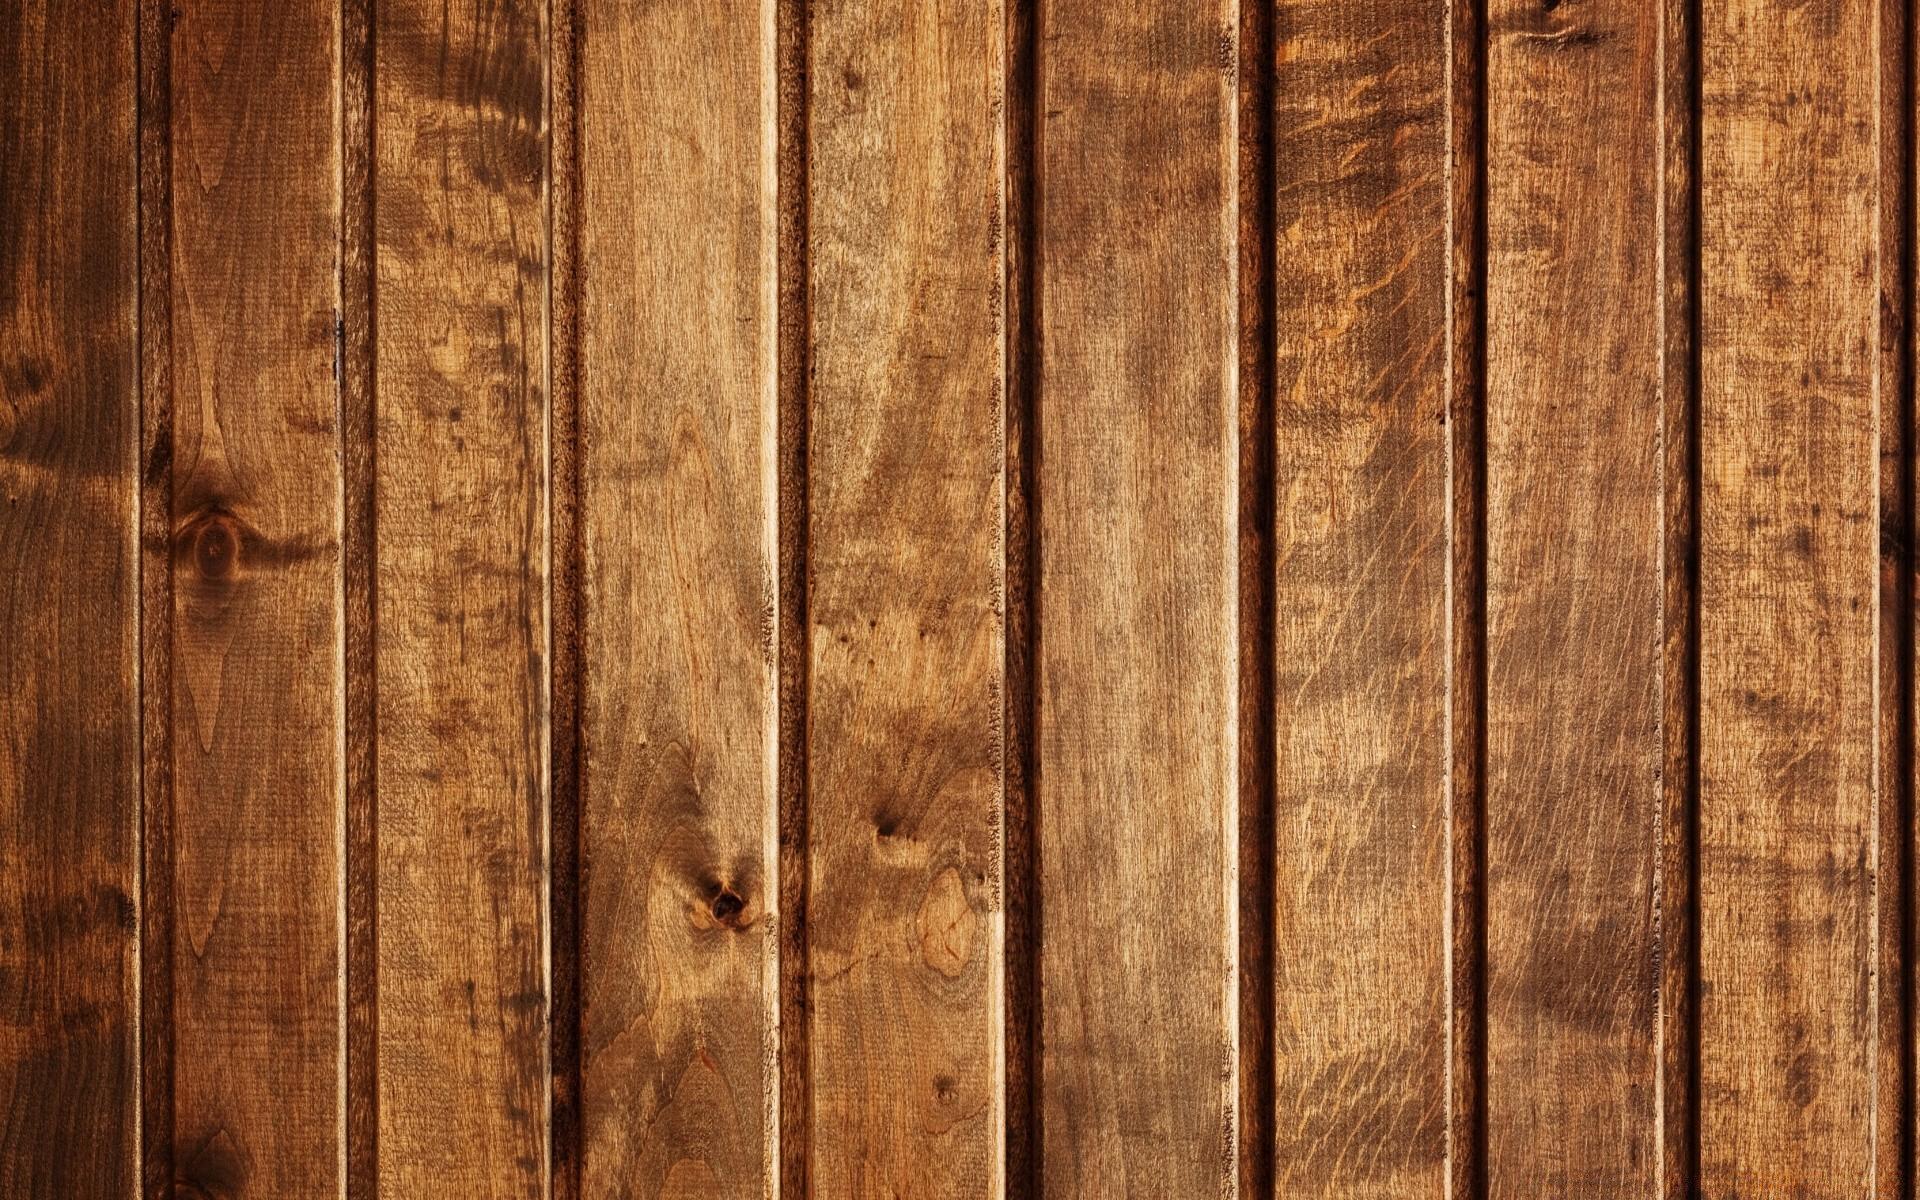 1920 x 1200 · jpeg - Wood Panels - Android wallpapers